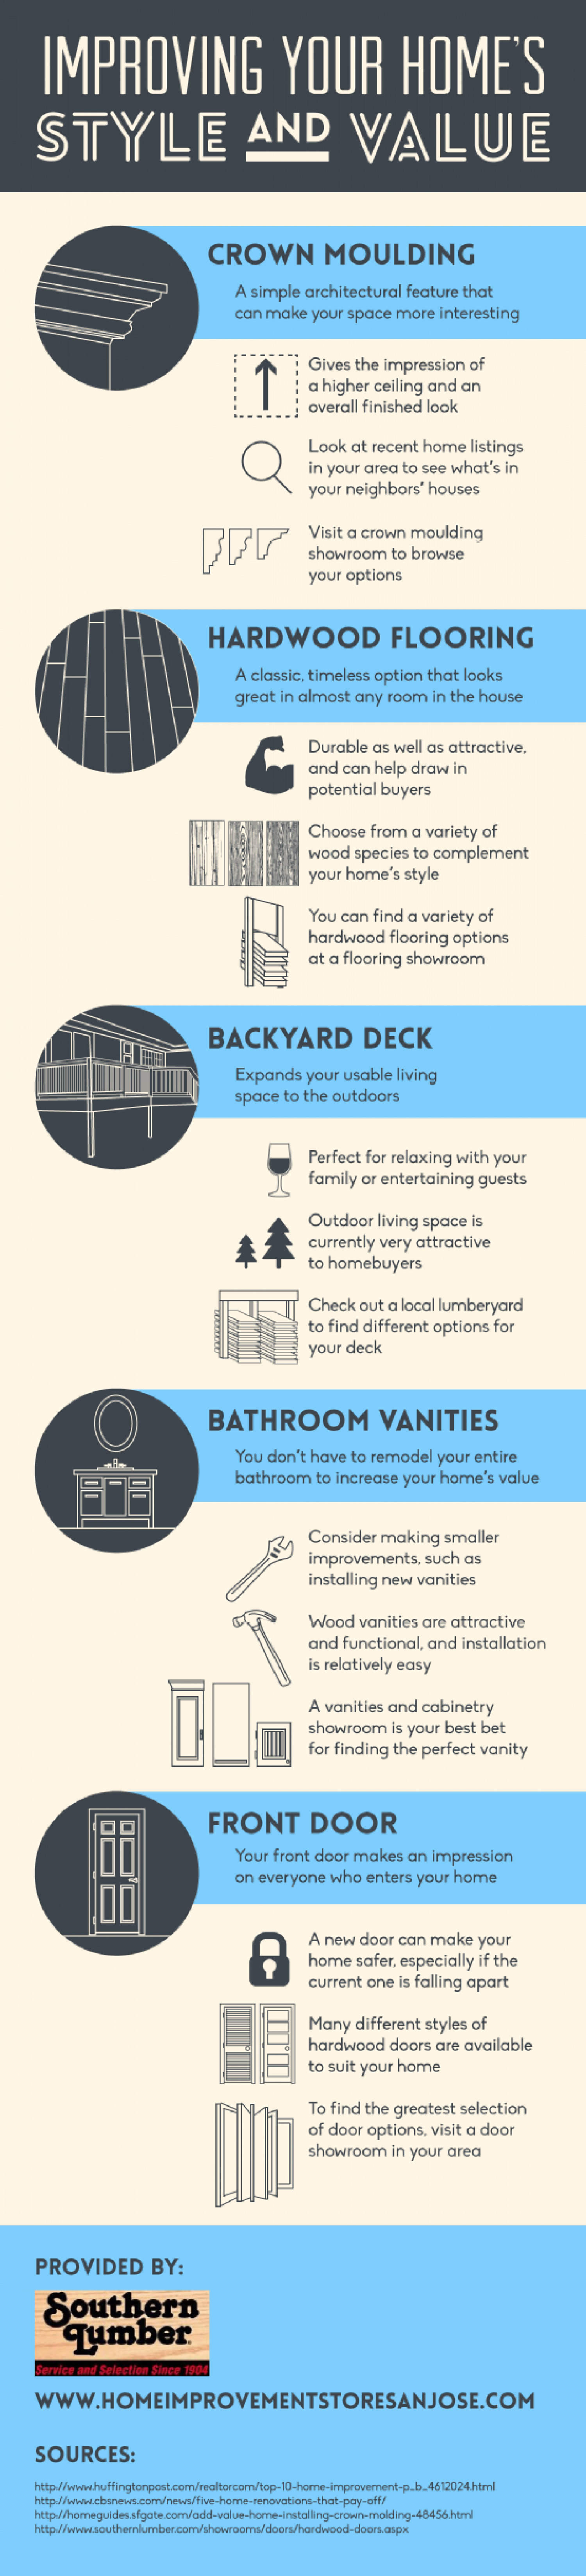 Improving Your Home’s Style and Value Infographic